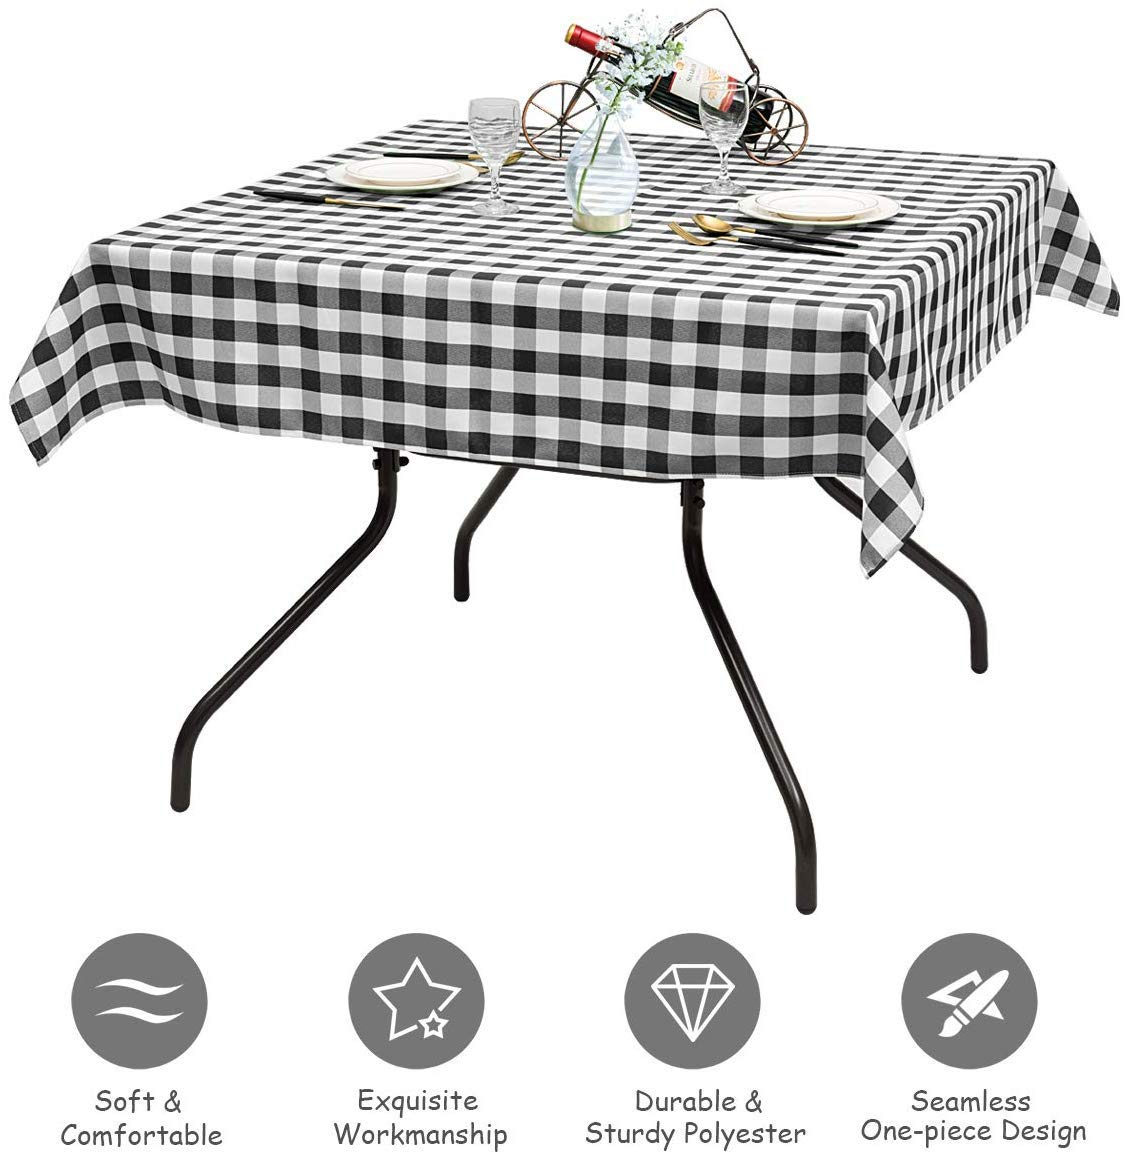 Giantex Decorative Buffalo Plaid Table Cover for Kitchen Dining Wedding Party